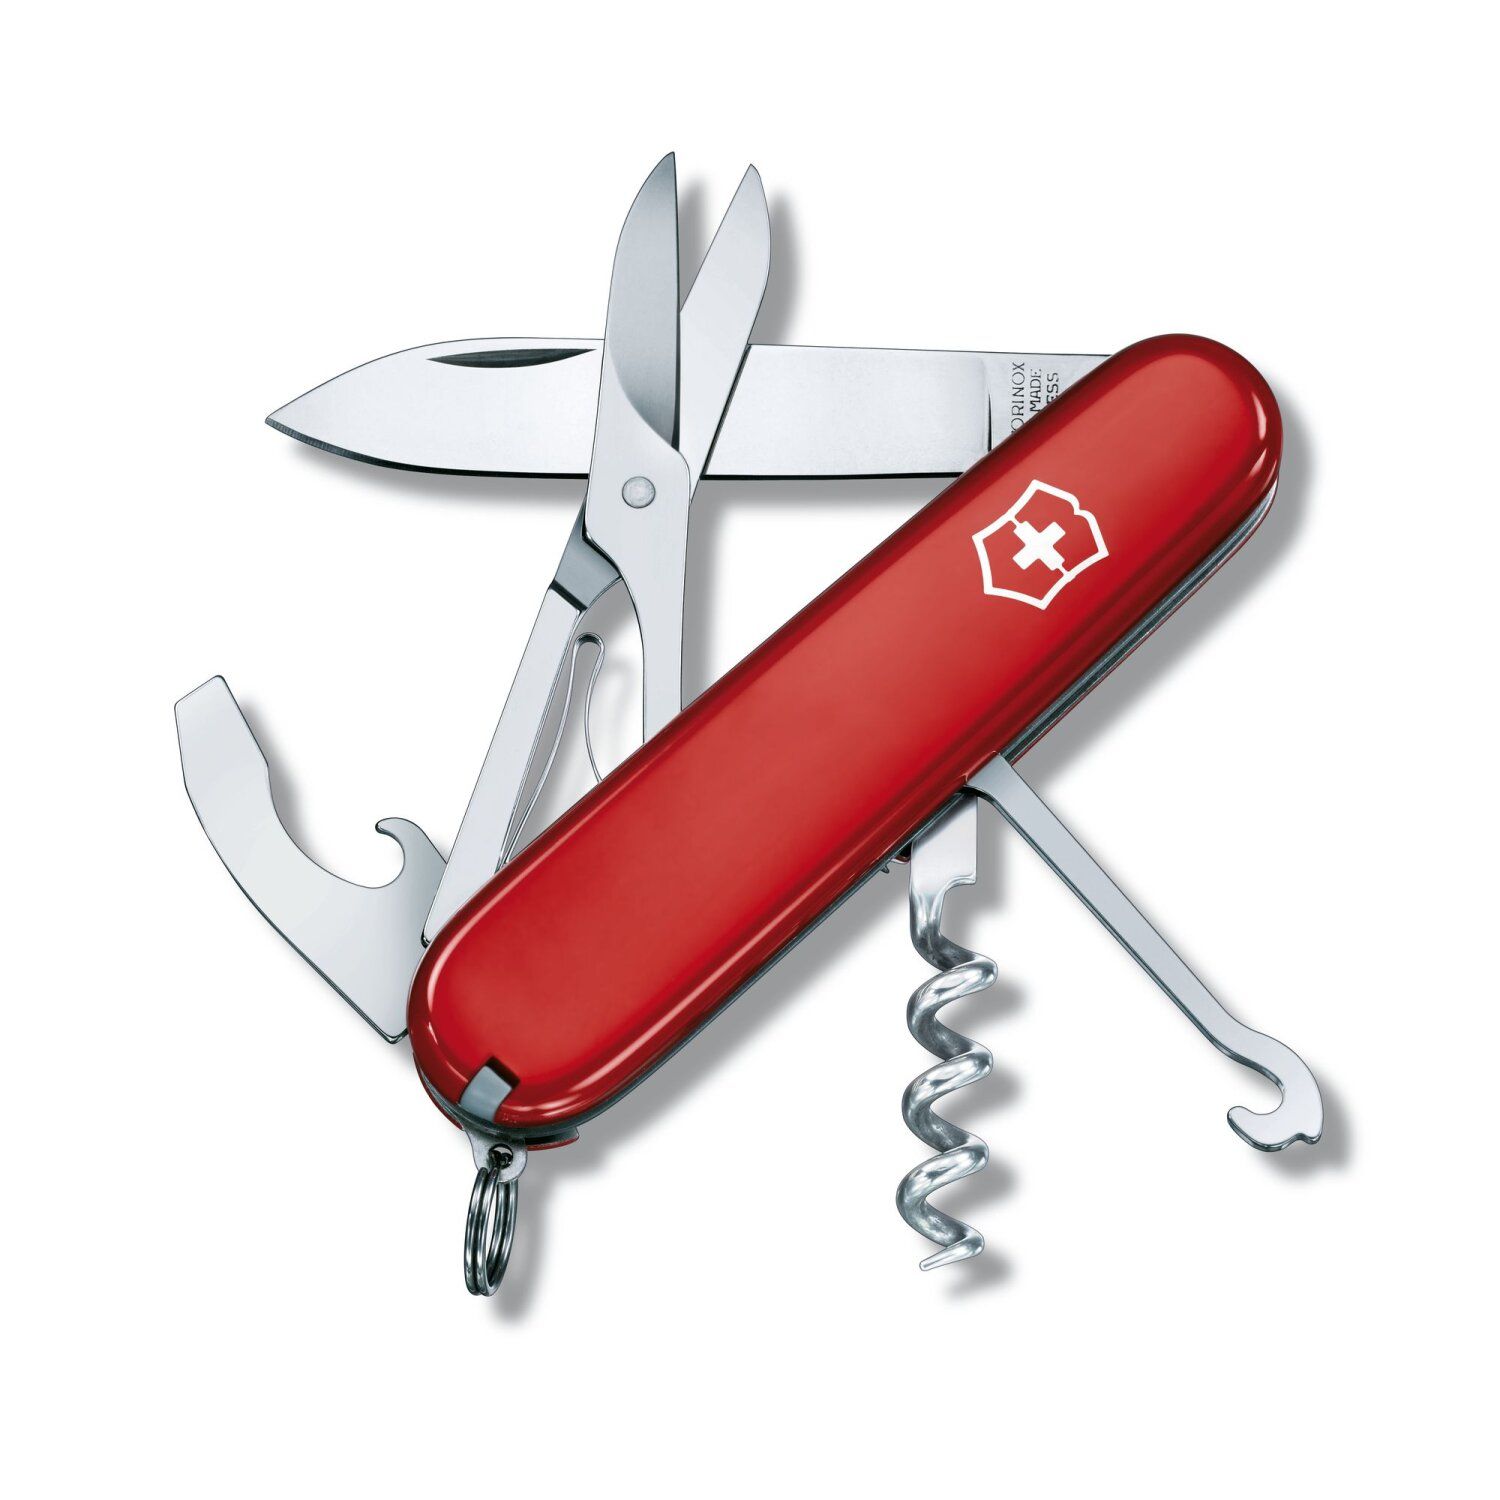 Victorinox - Officer's knife Compact 91mm red